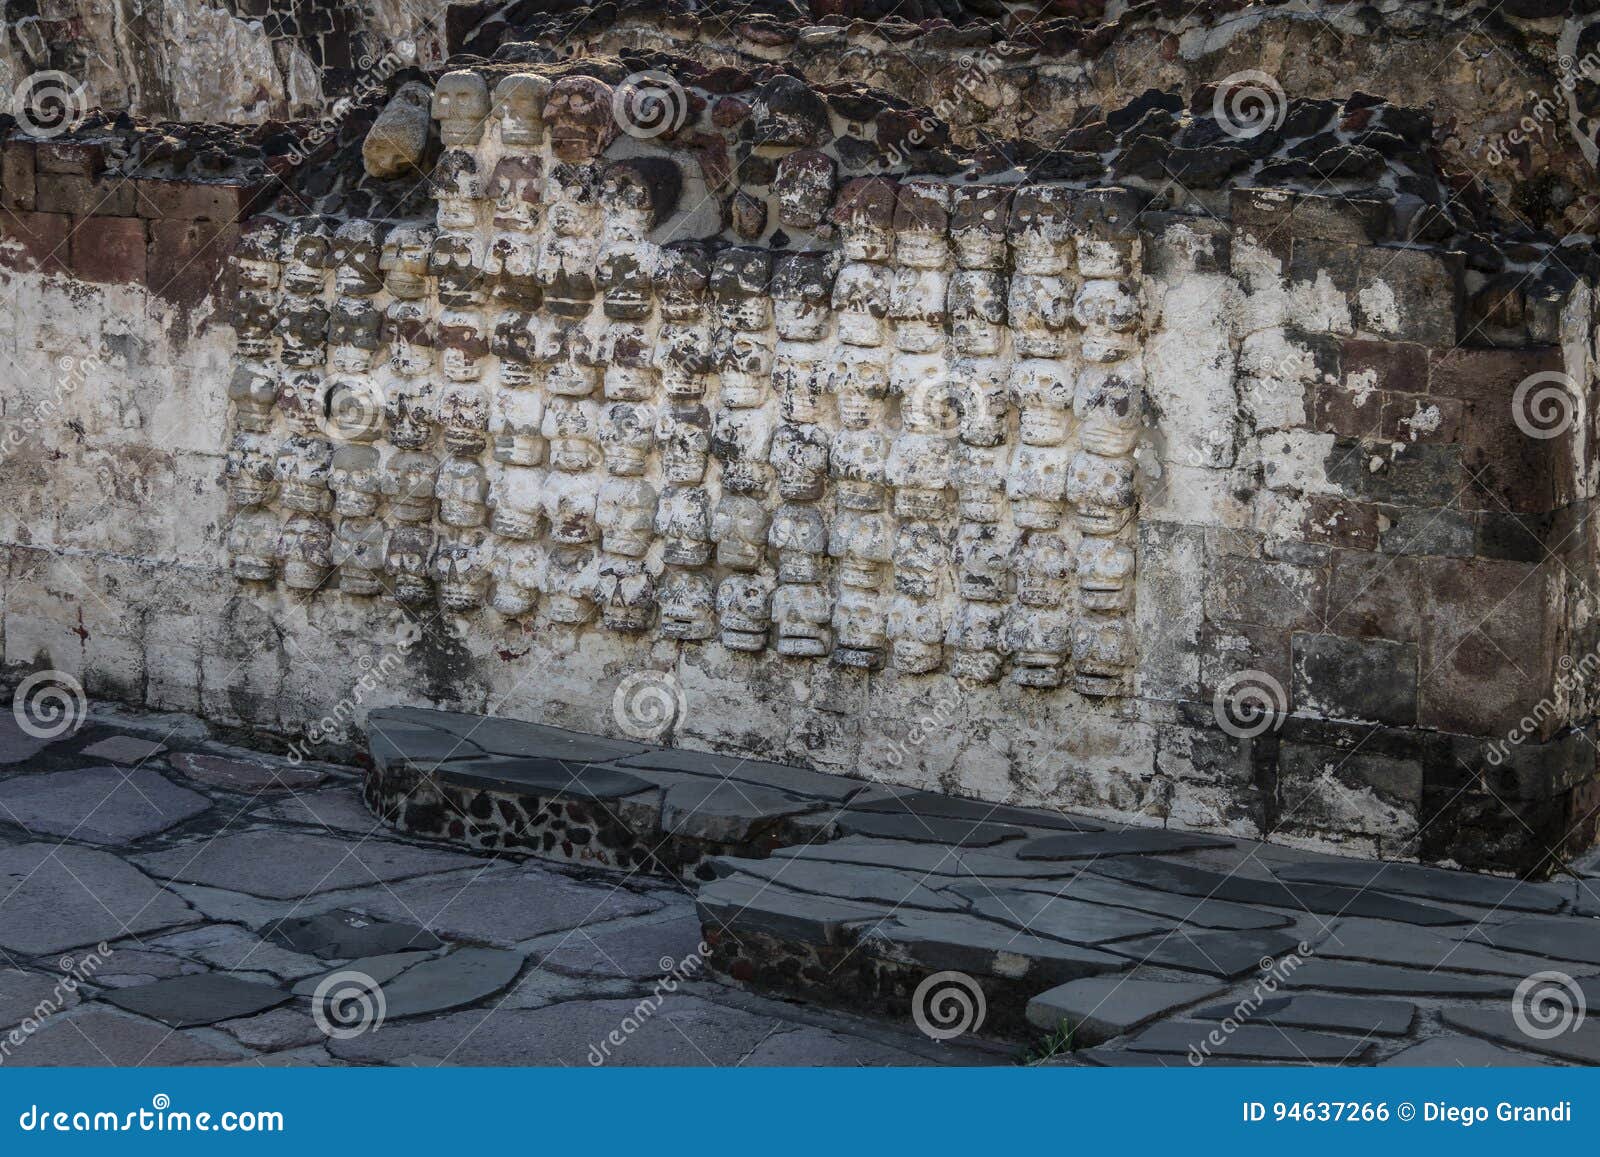 tzompantli altar with carved skulls rows in aztec temple templo mayor at ruins of tenochtitlan - mexico city, mexico